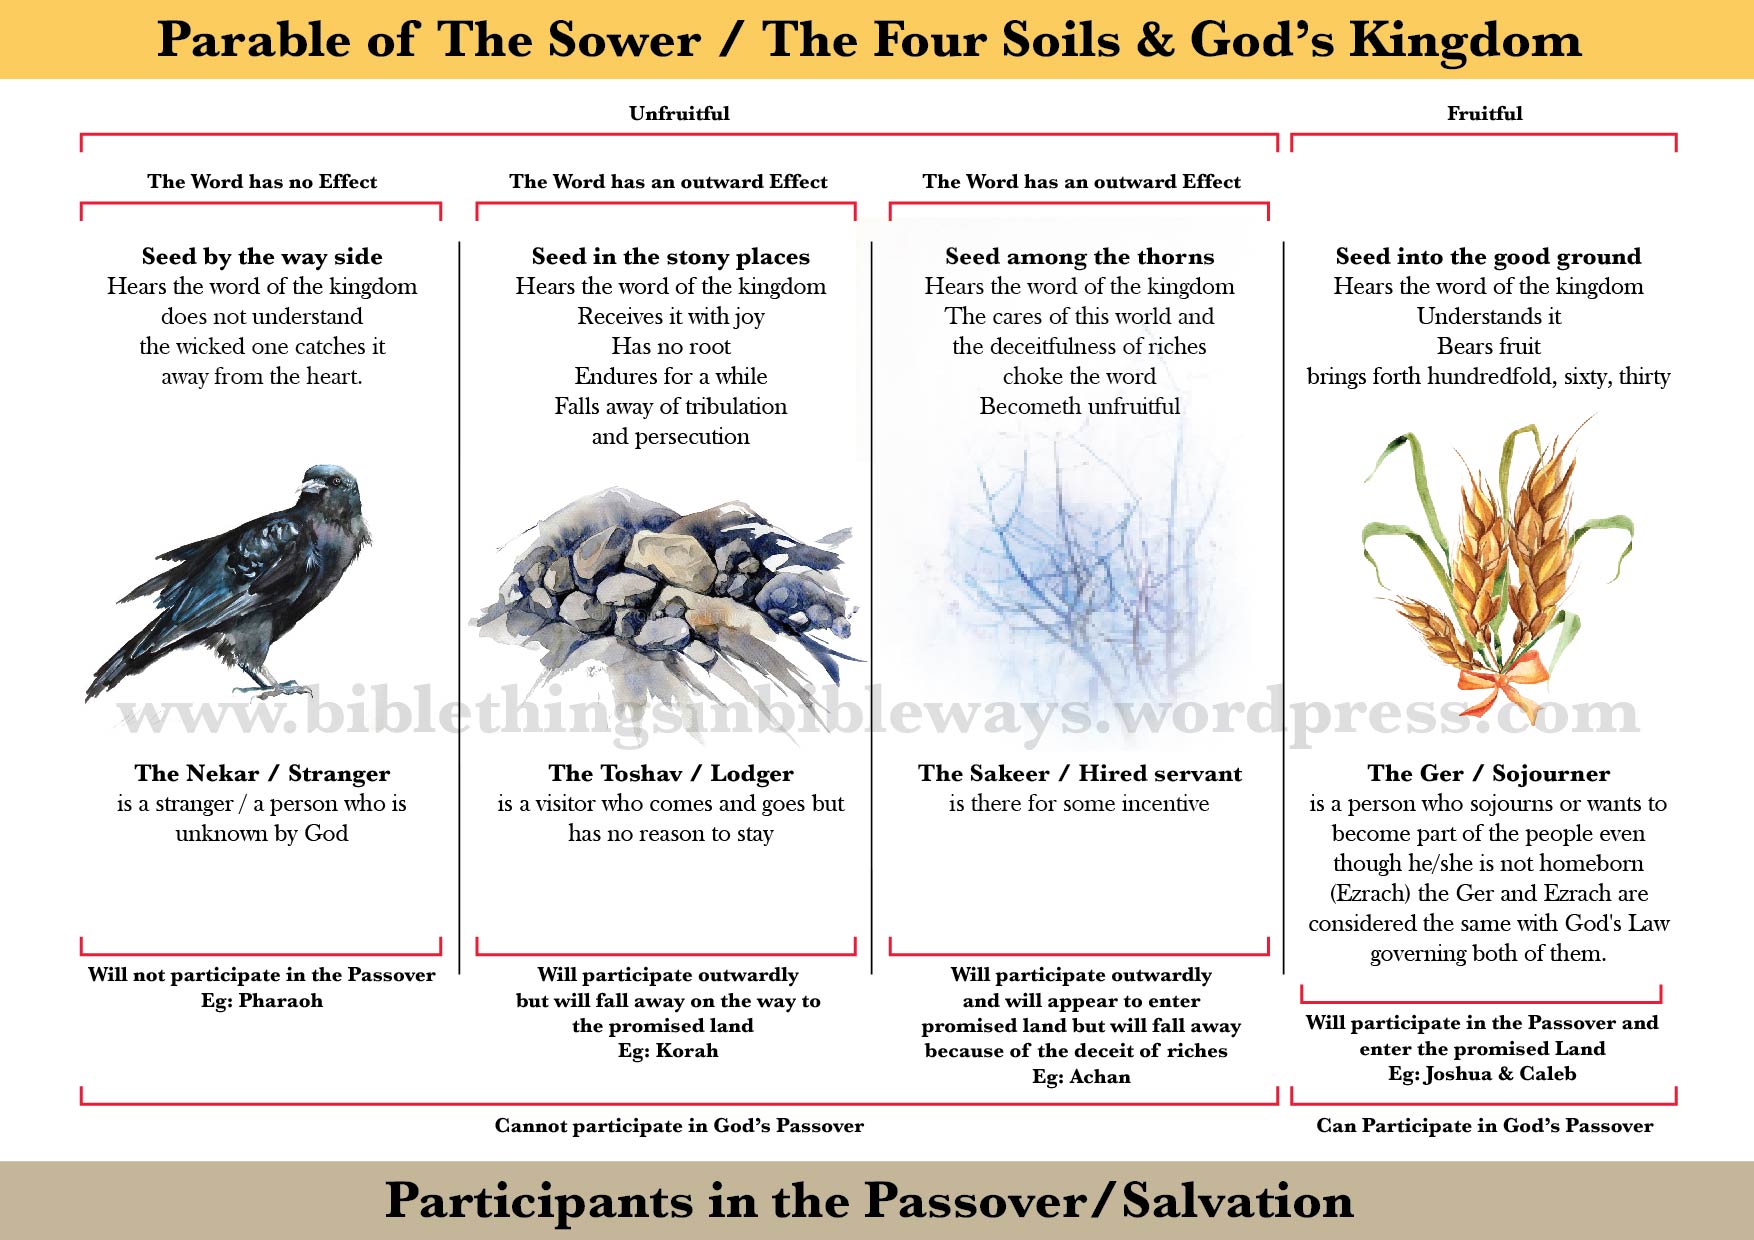 the | Bible in of Sower and Bible ways Parable the The things Passover